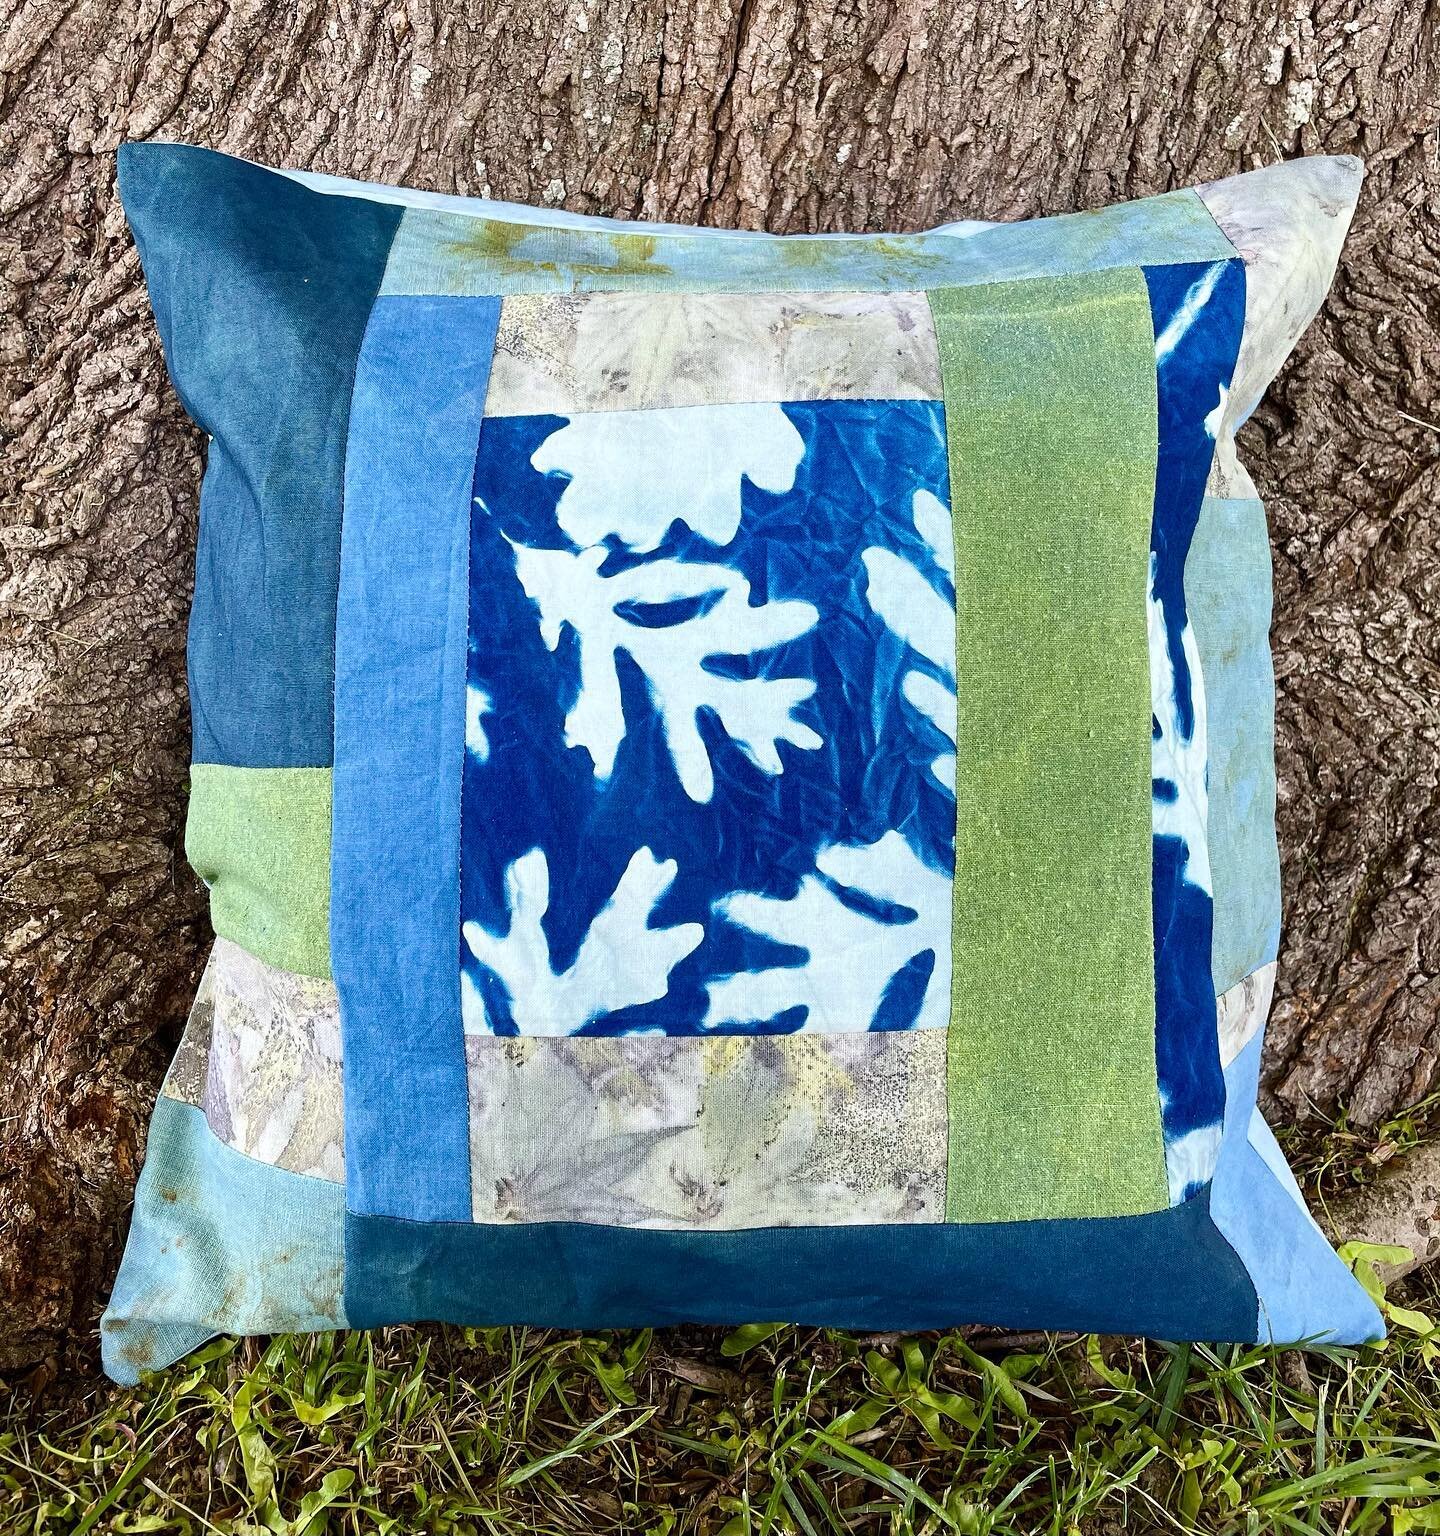 Patchwork throw pillow spotlight&hellip;this color palette reminds me of getting lost in the beauty of ocean waves. Just a few more pillows remaining in the shop, sewn with seasonal plant dyed &amp; printed remnants! 🌊